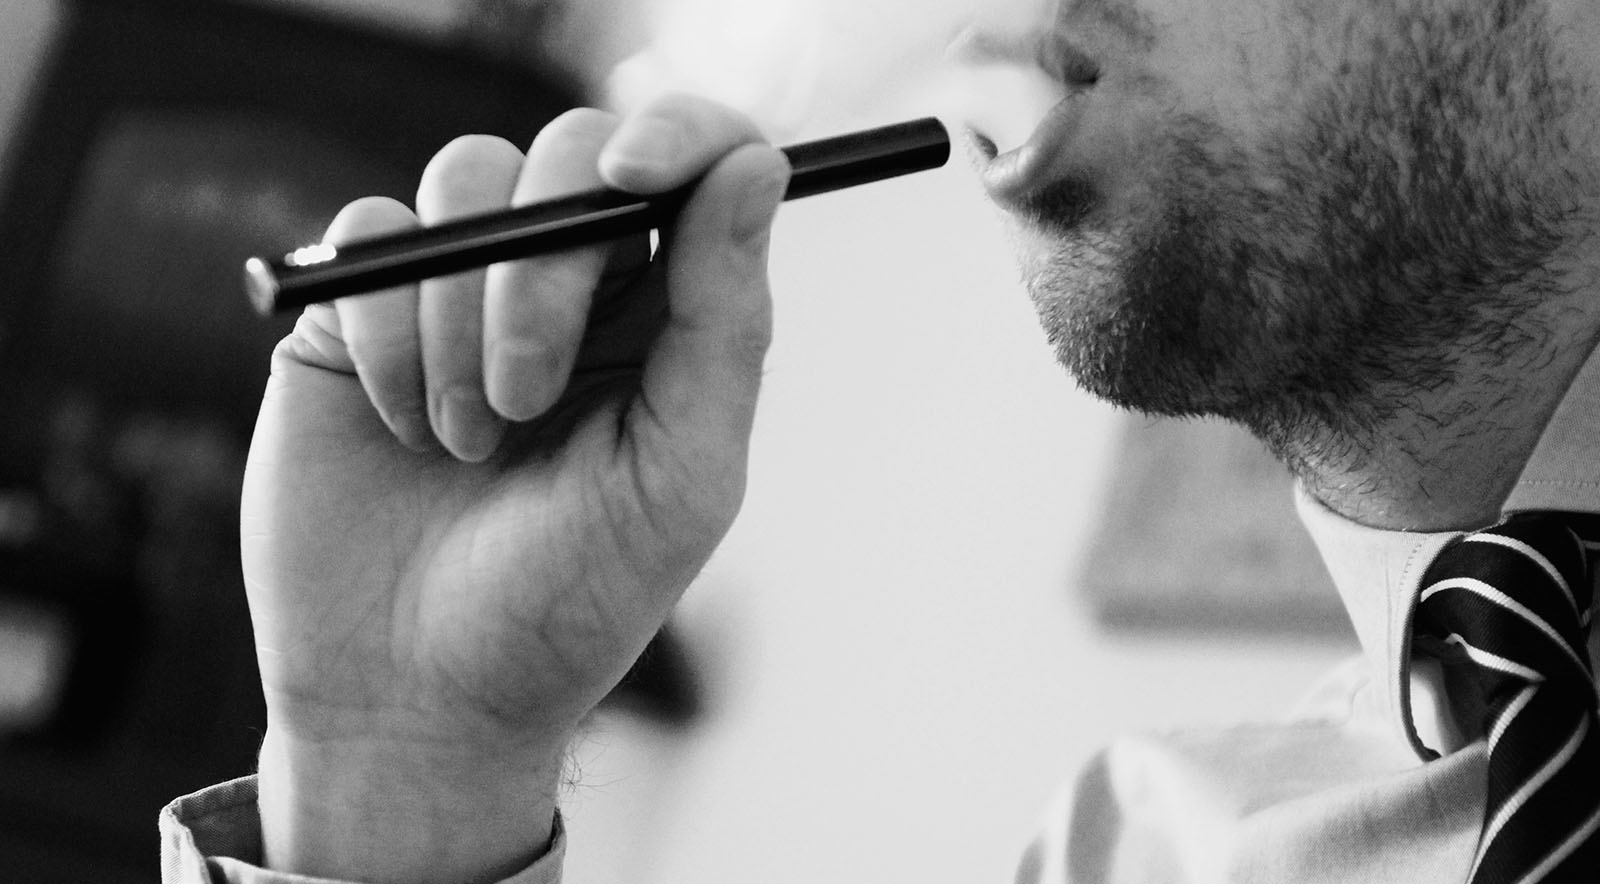 The Do’s and Don’ts of Using Weed at Work